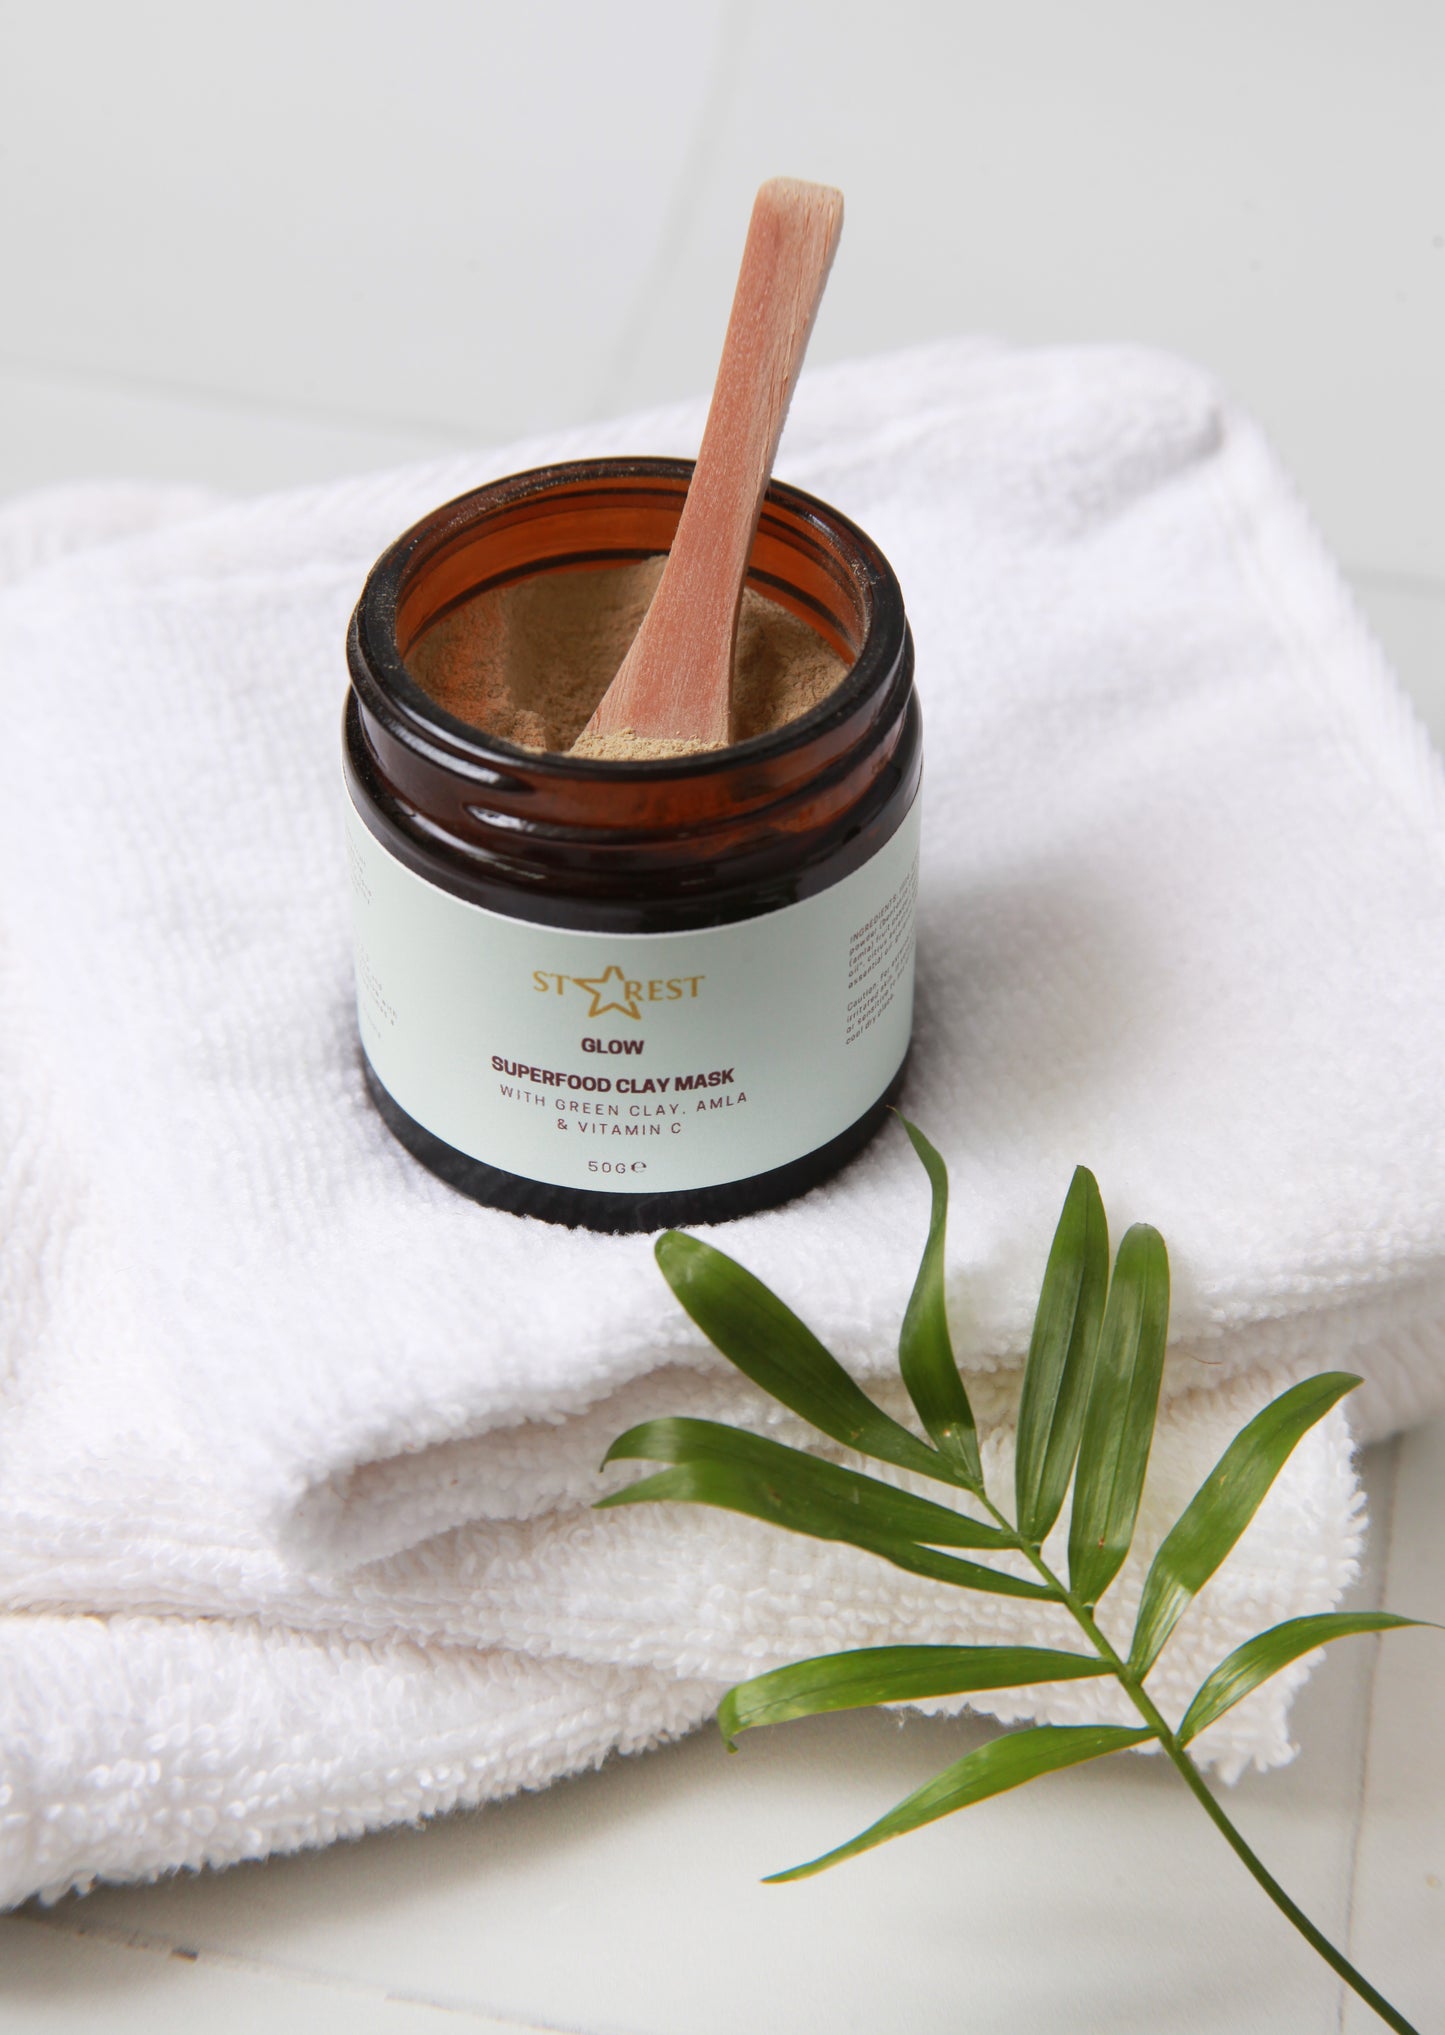 Glow Superfood Clay Mask